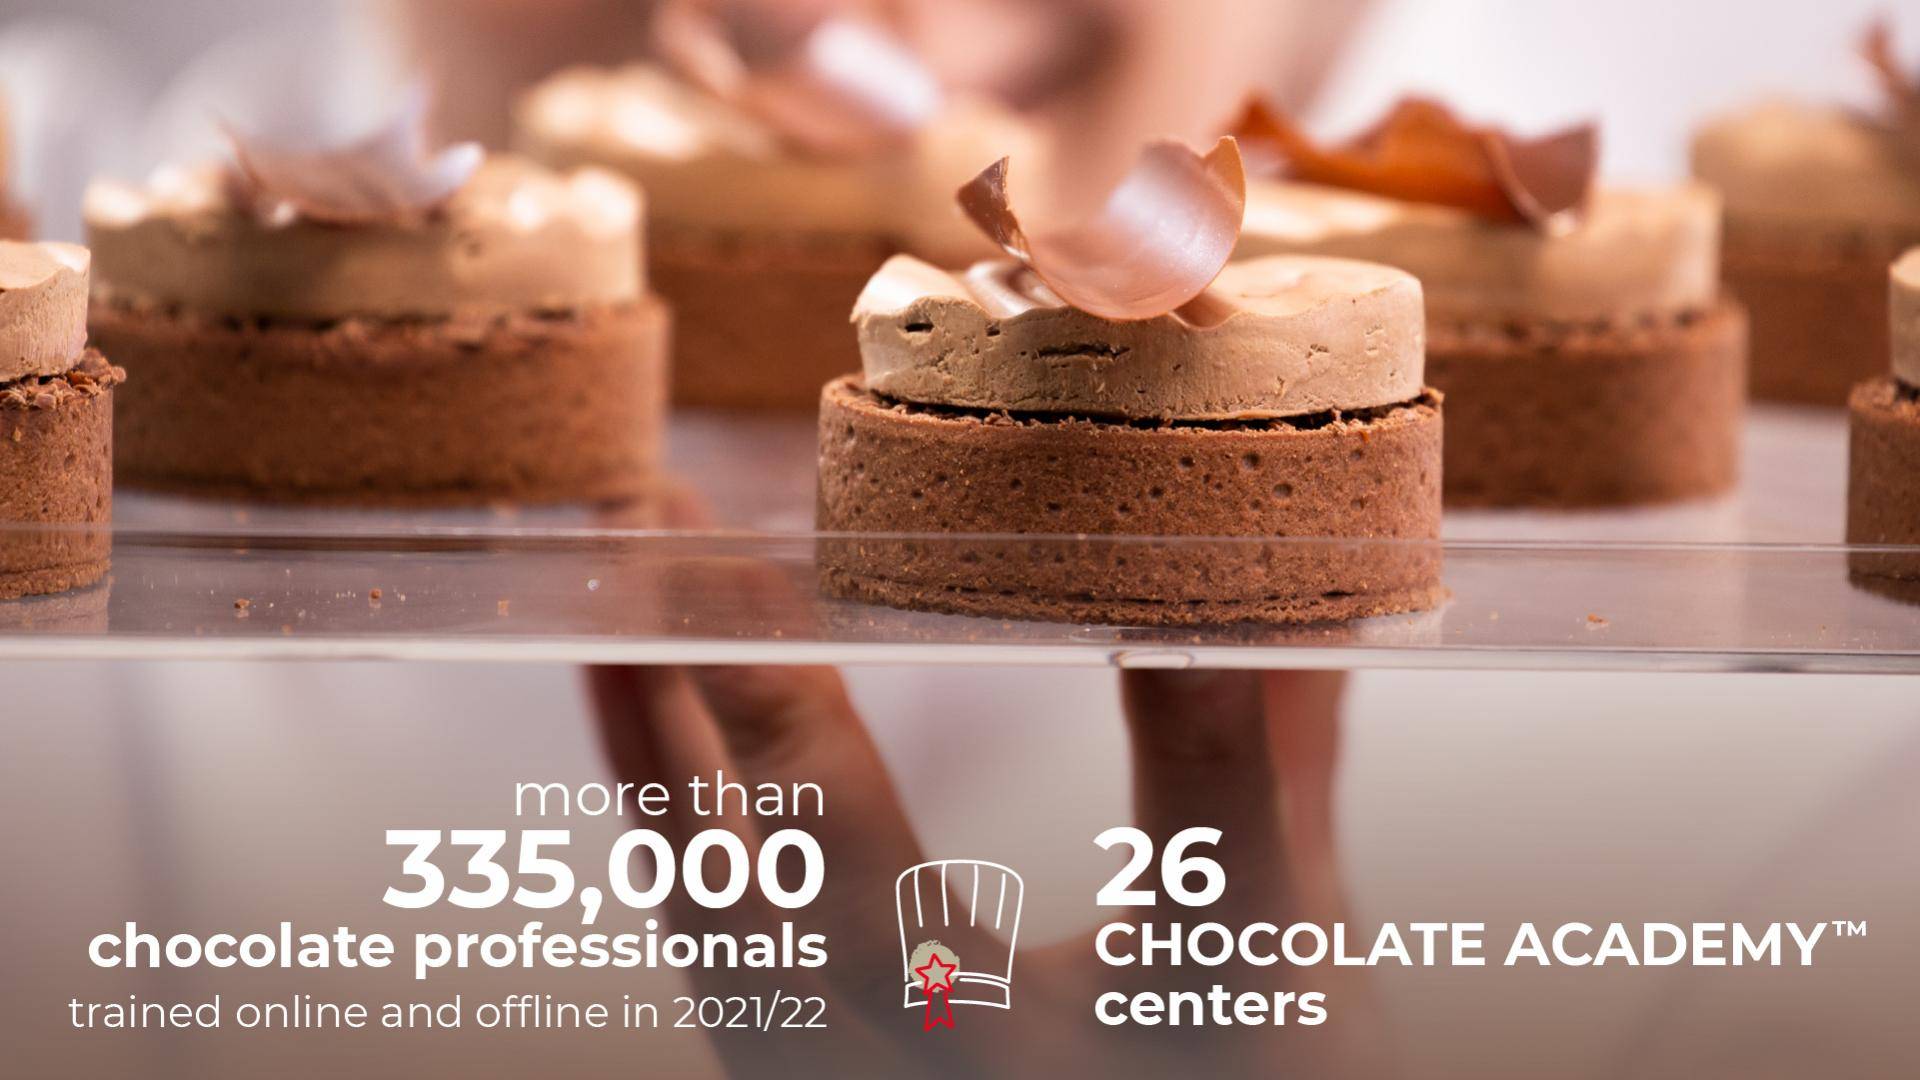 Chocolate professionals - Chocolate Academy Barry-Callebaut_Annual-Report 2022